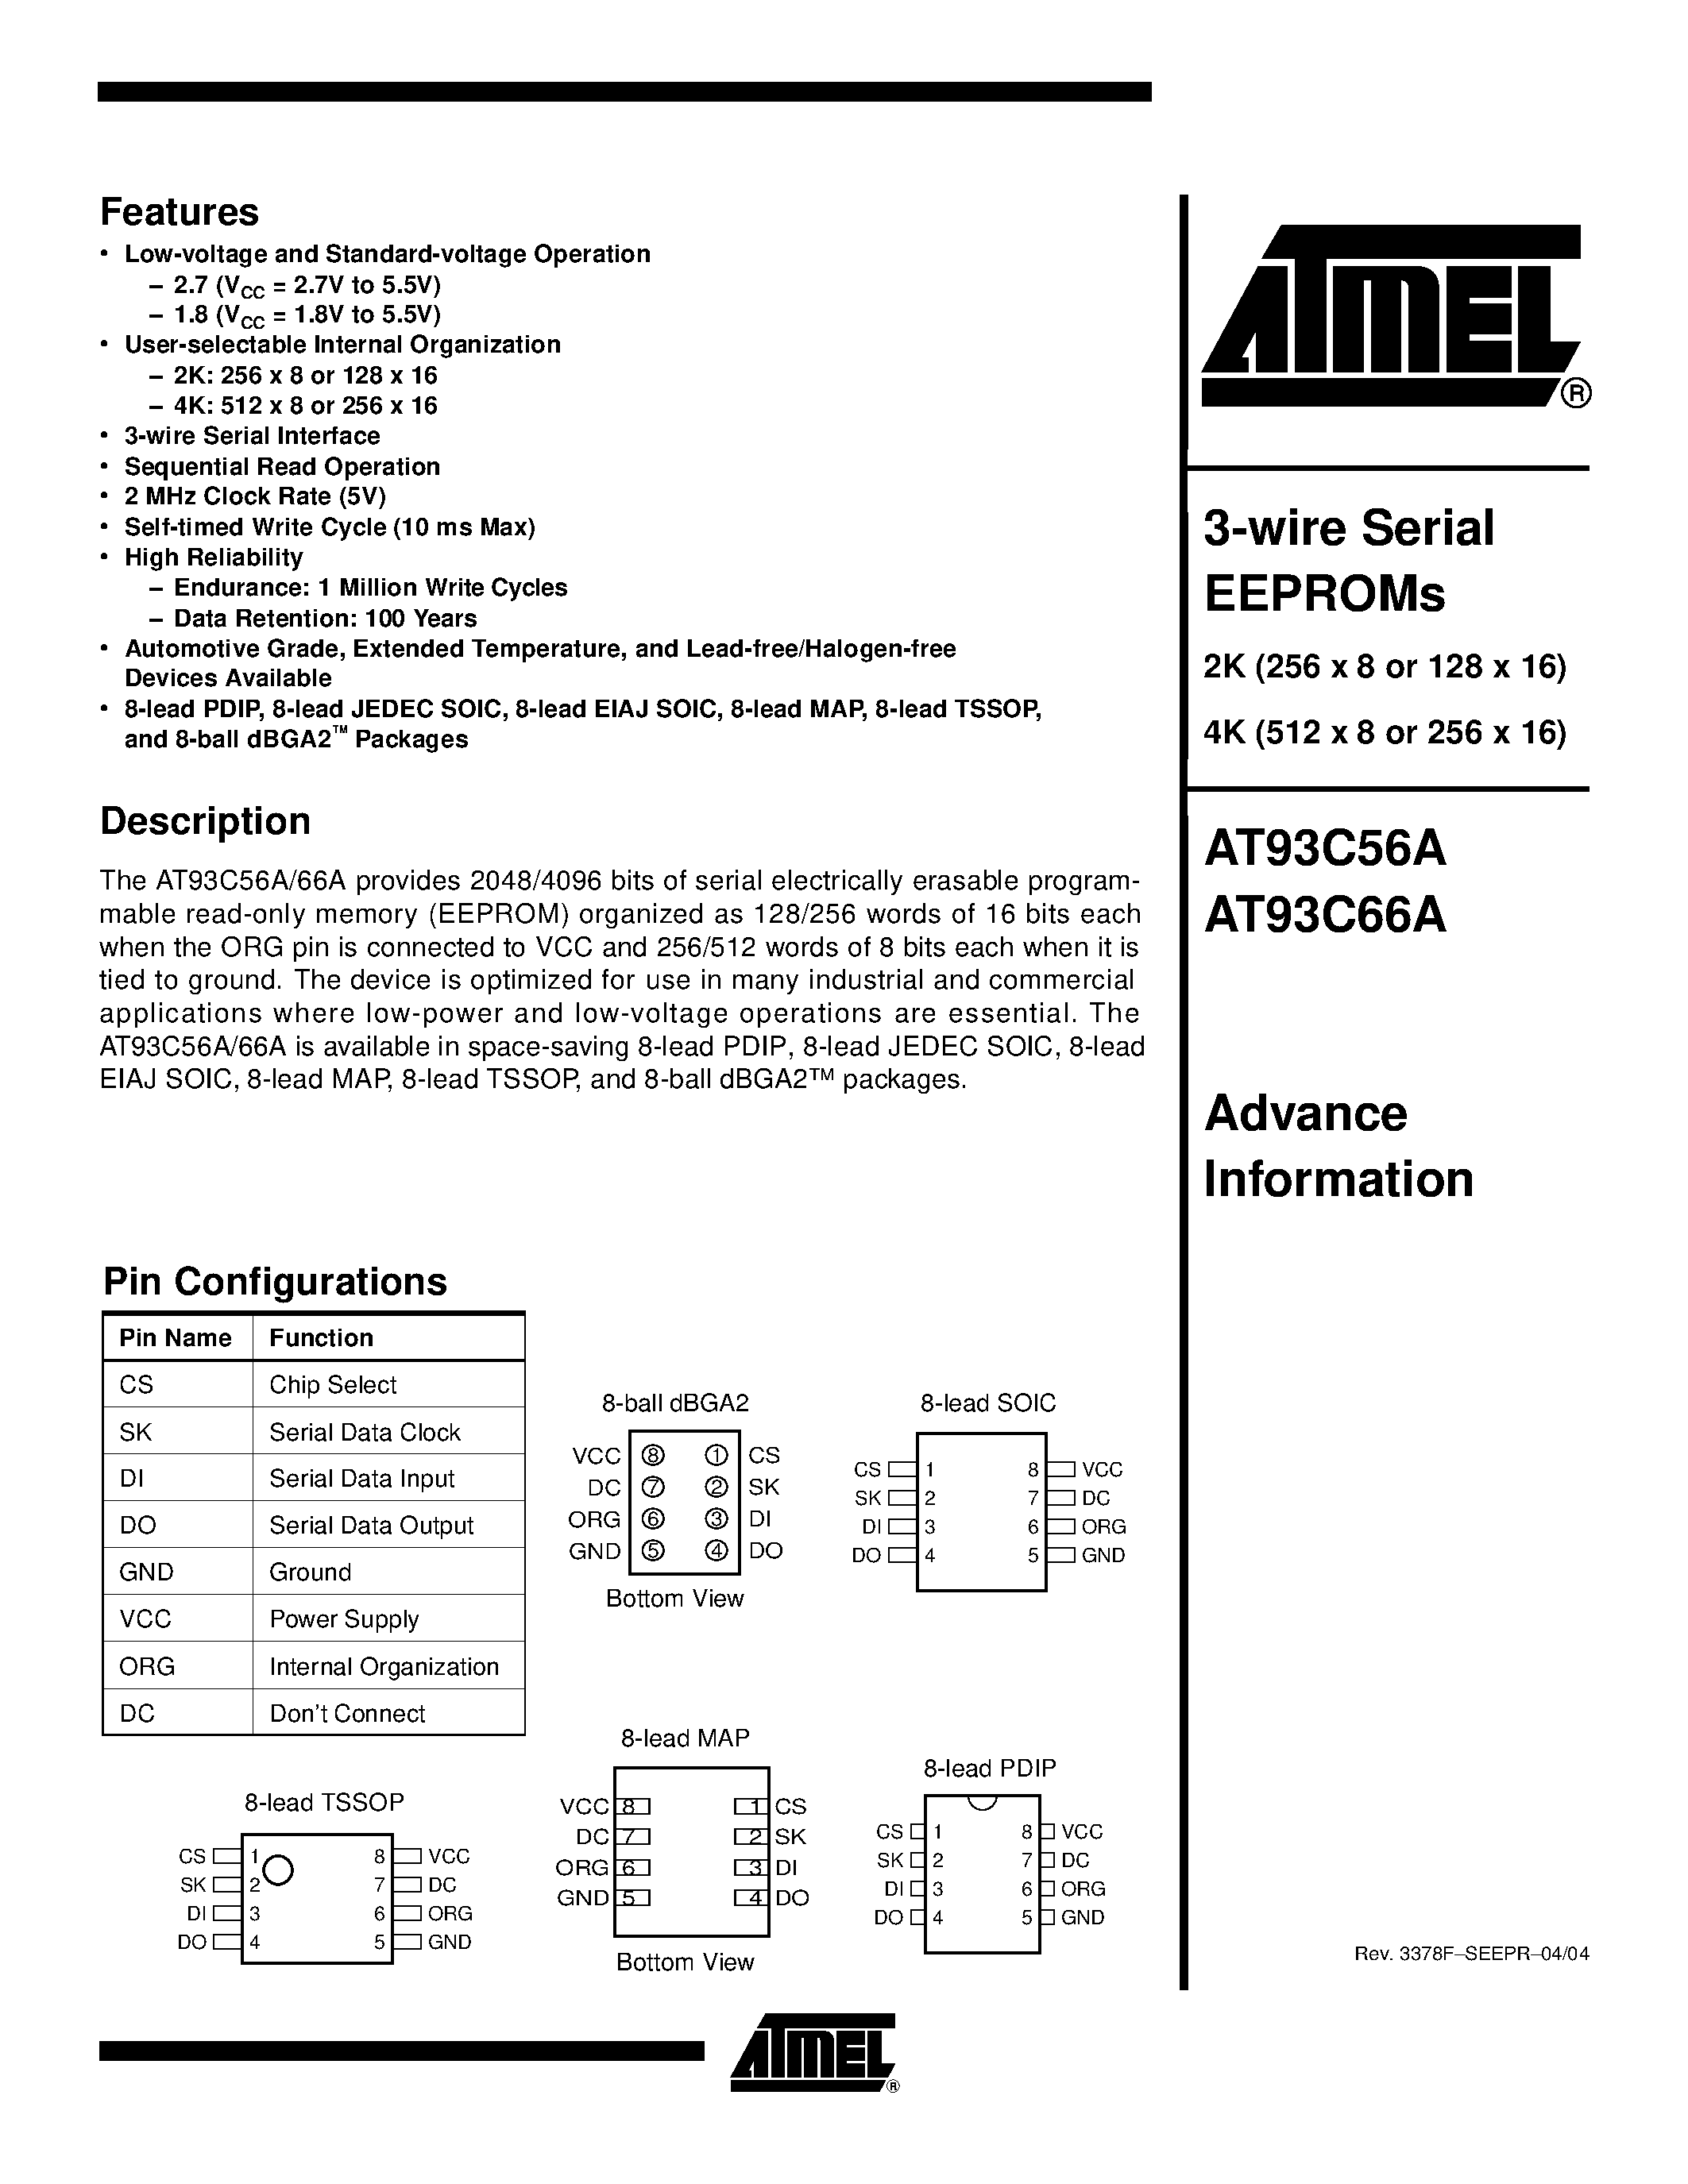 Datasheet AT93C66A-10SU-1.8 - 3-wire Serial EEPROMs 2K (256 x 8 or 128 x 16) page 1